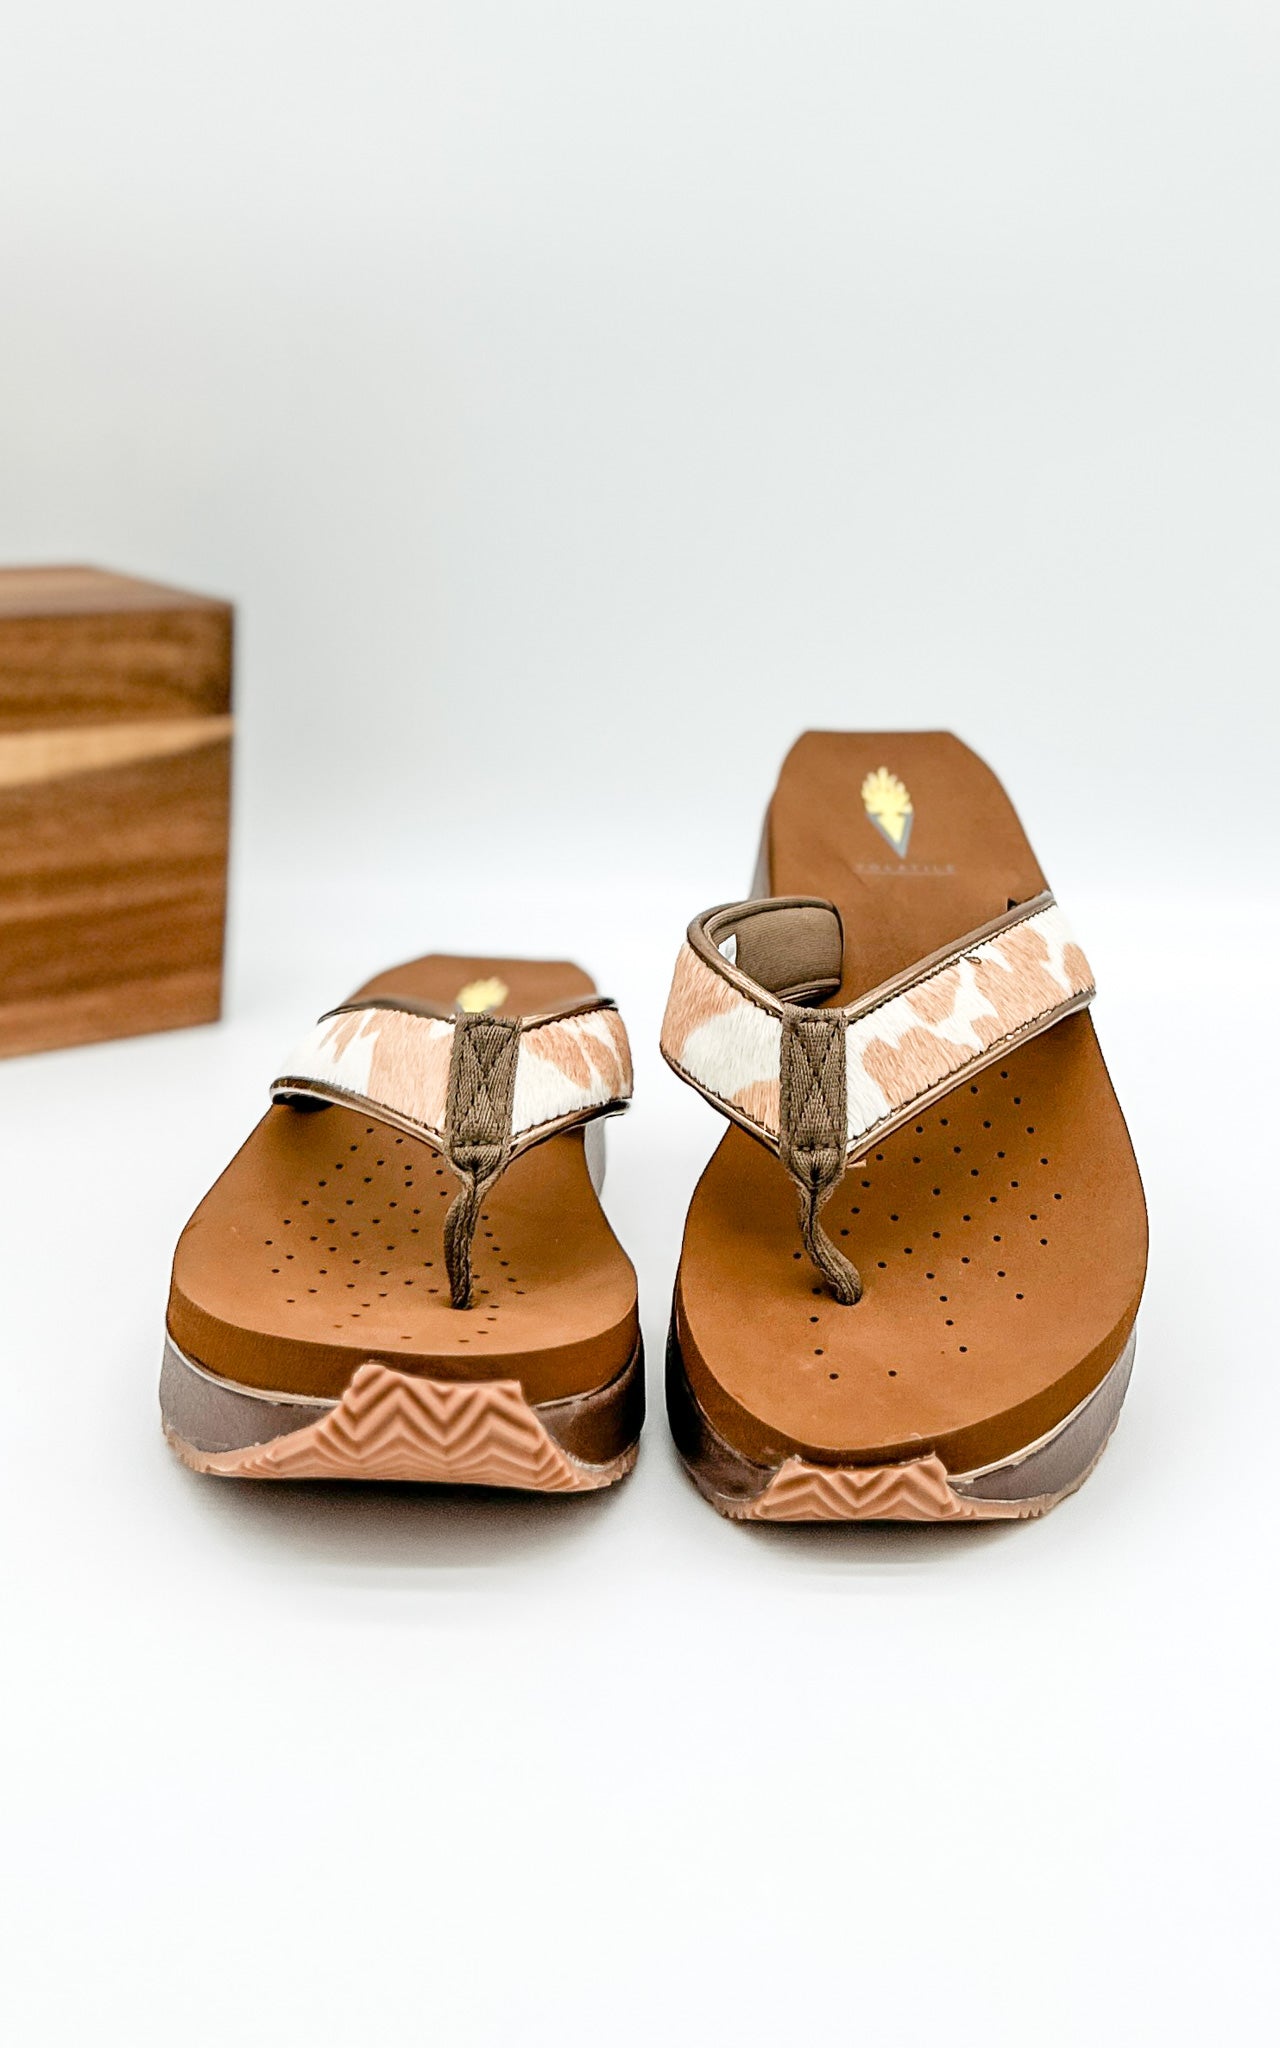 Volatile Neville Sandals in Tan with White Cowhide Straps